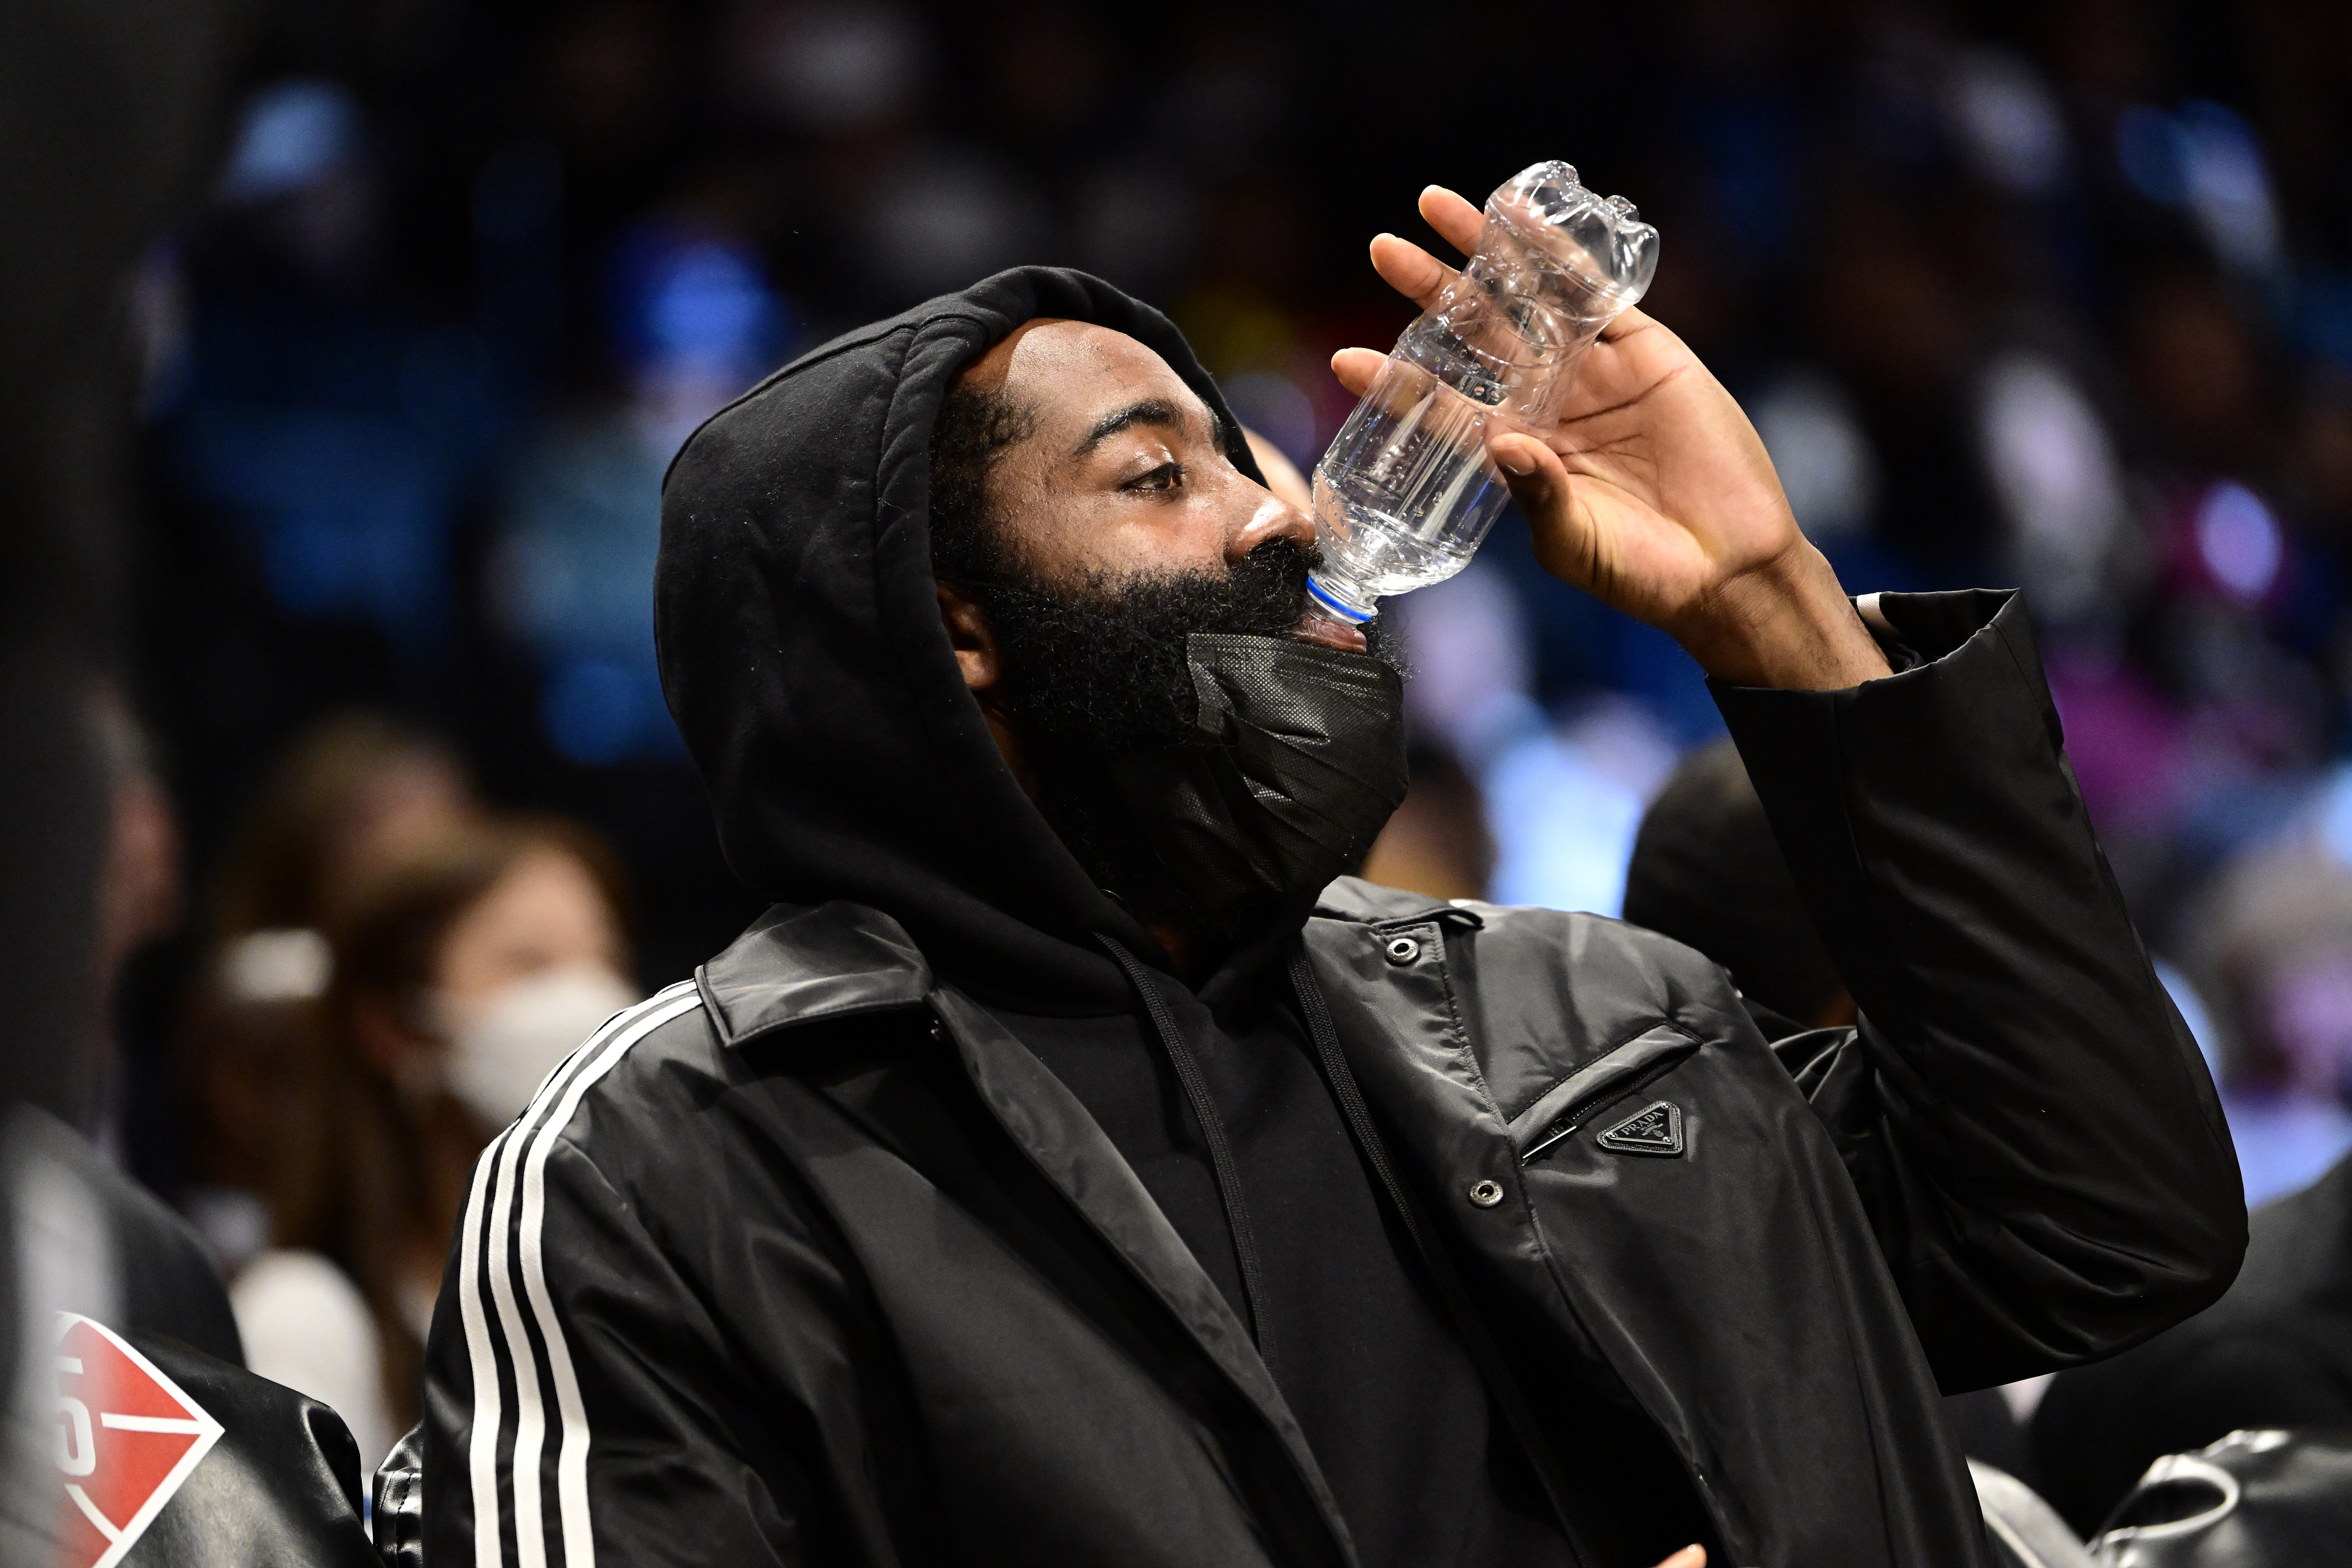 B/R predicts James Harden to re-sign with Sixers in the offseason